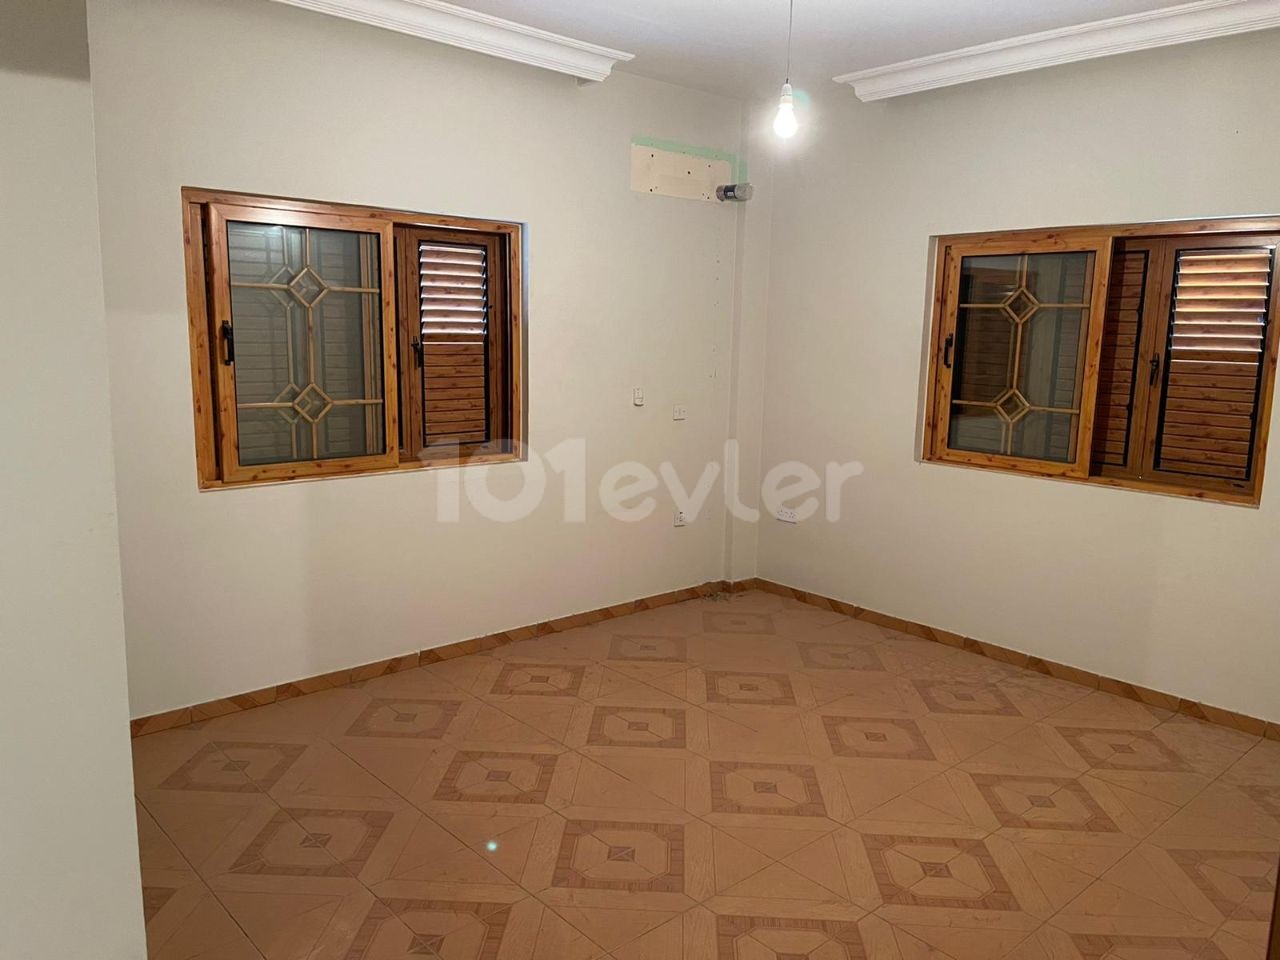 A DETACHED HOUSE WITH A GARDEN ON 1 ACRE OF LAND IN THE VILLAGE OF FAMAGUSTA MUTLUYAKA ** 